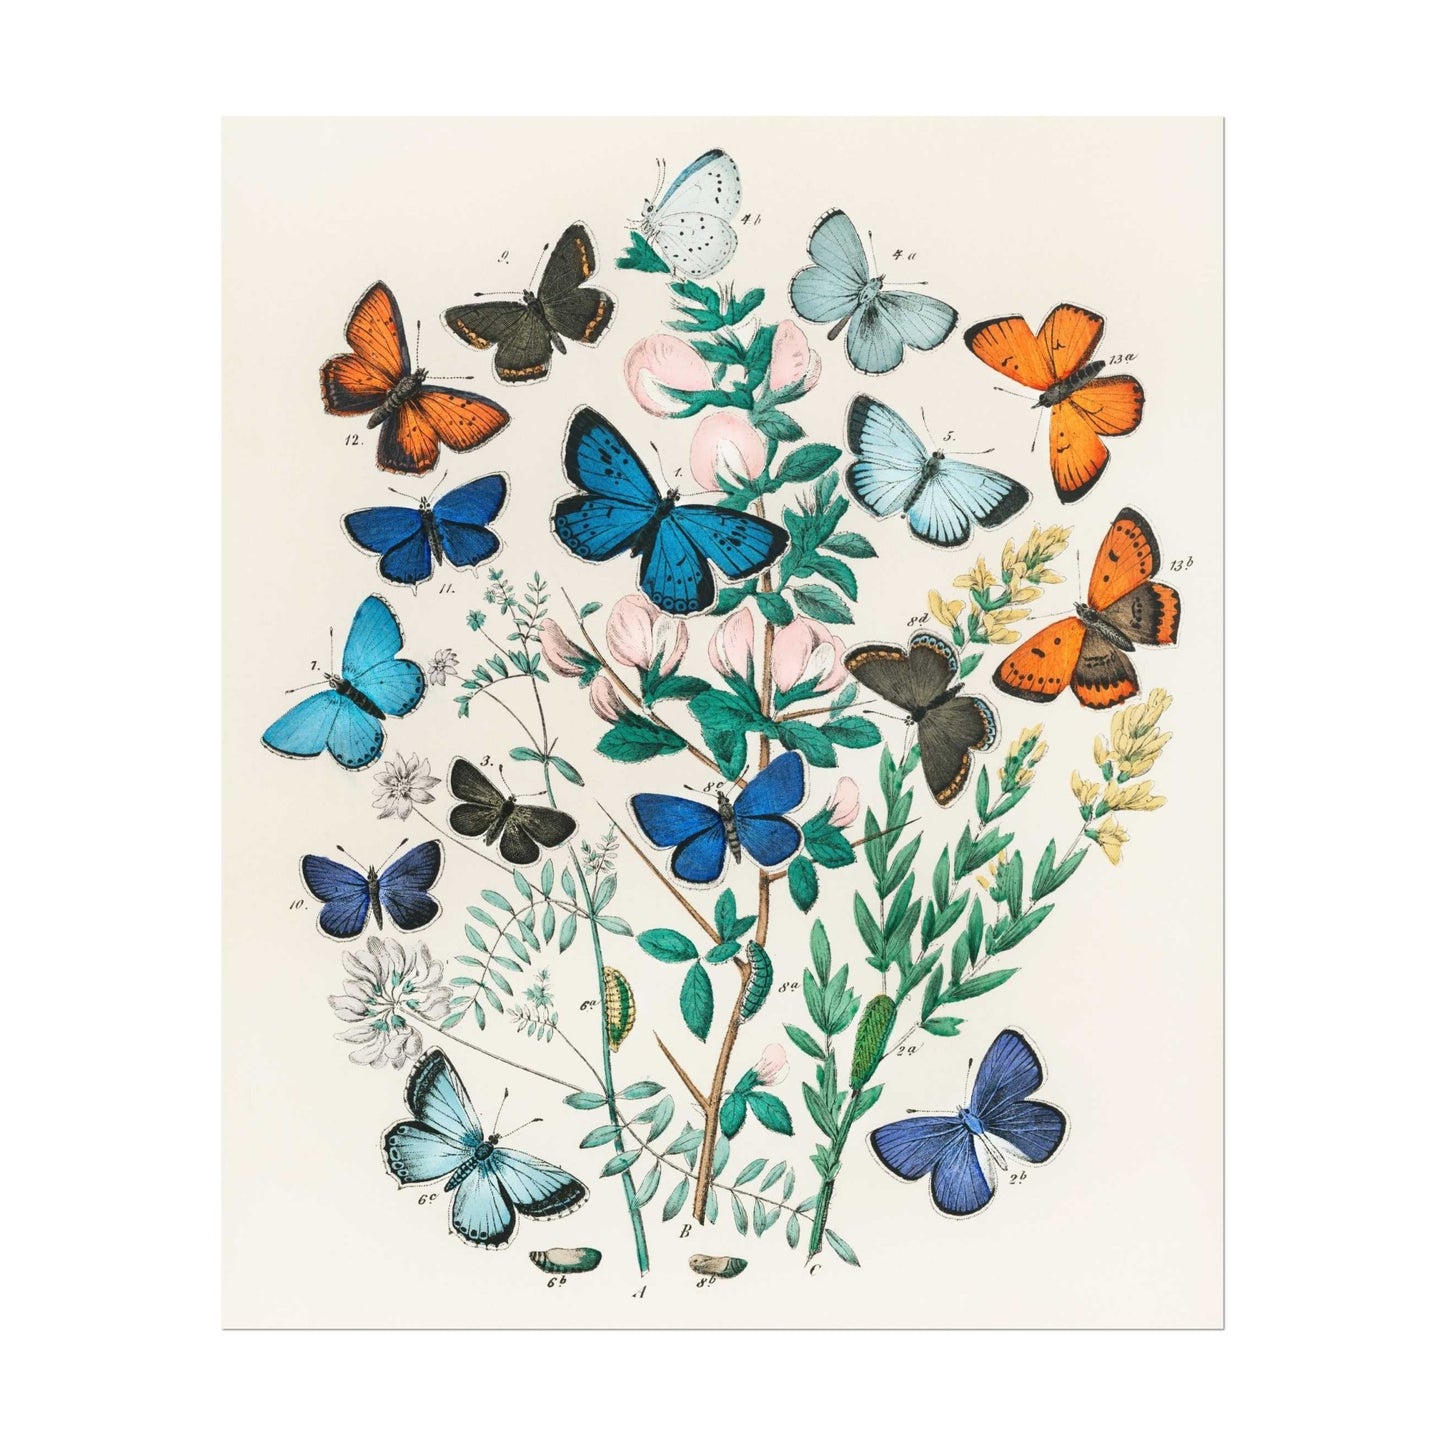 Butterflies (Vintage Illustration by William Forsell Kirby)